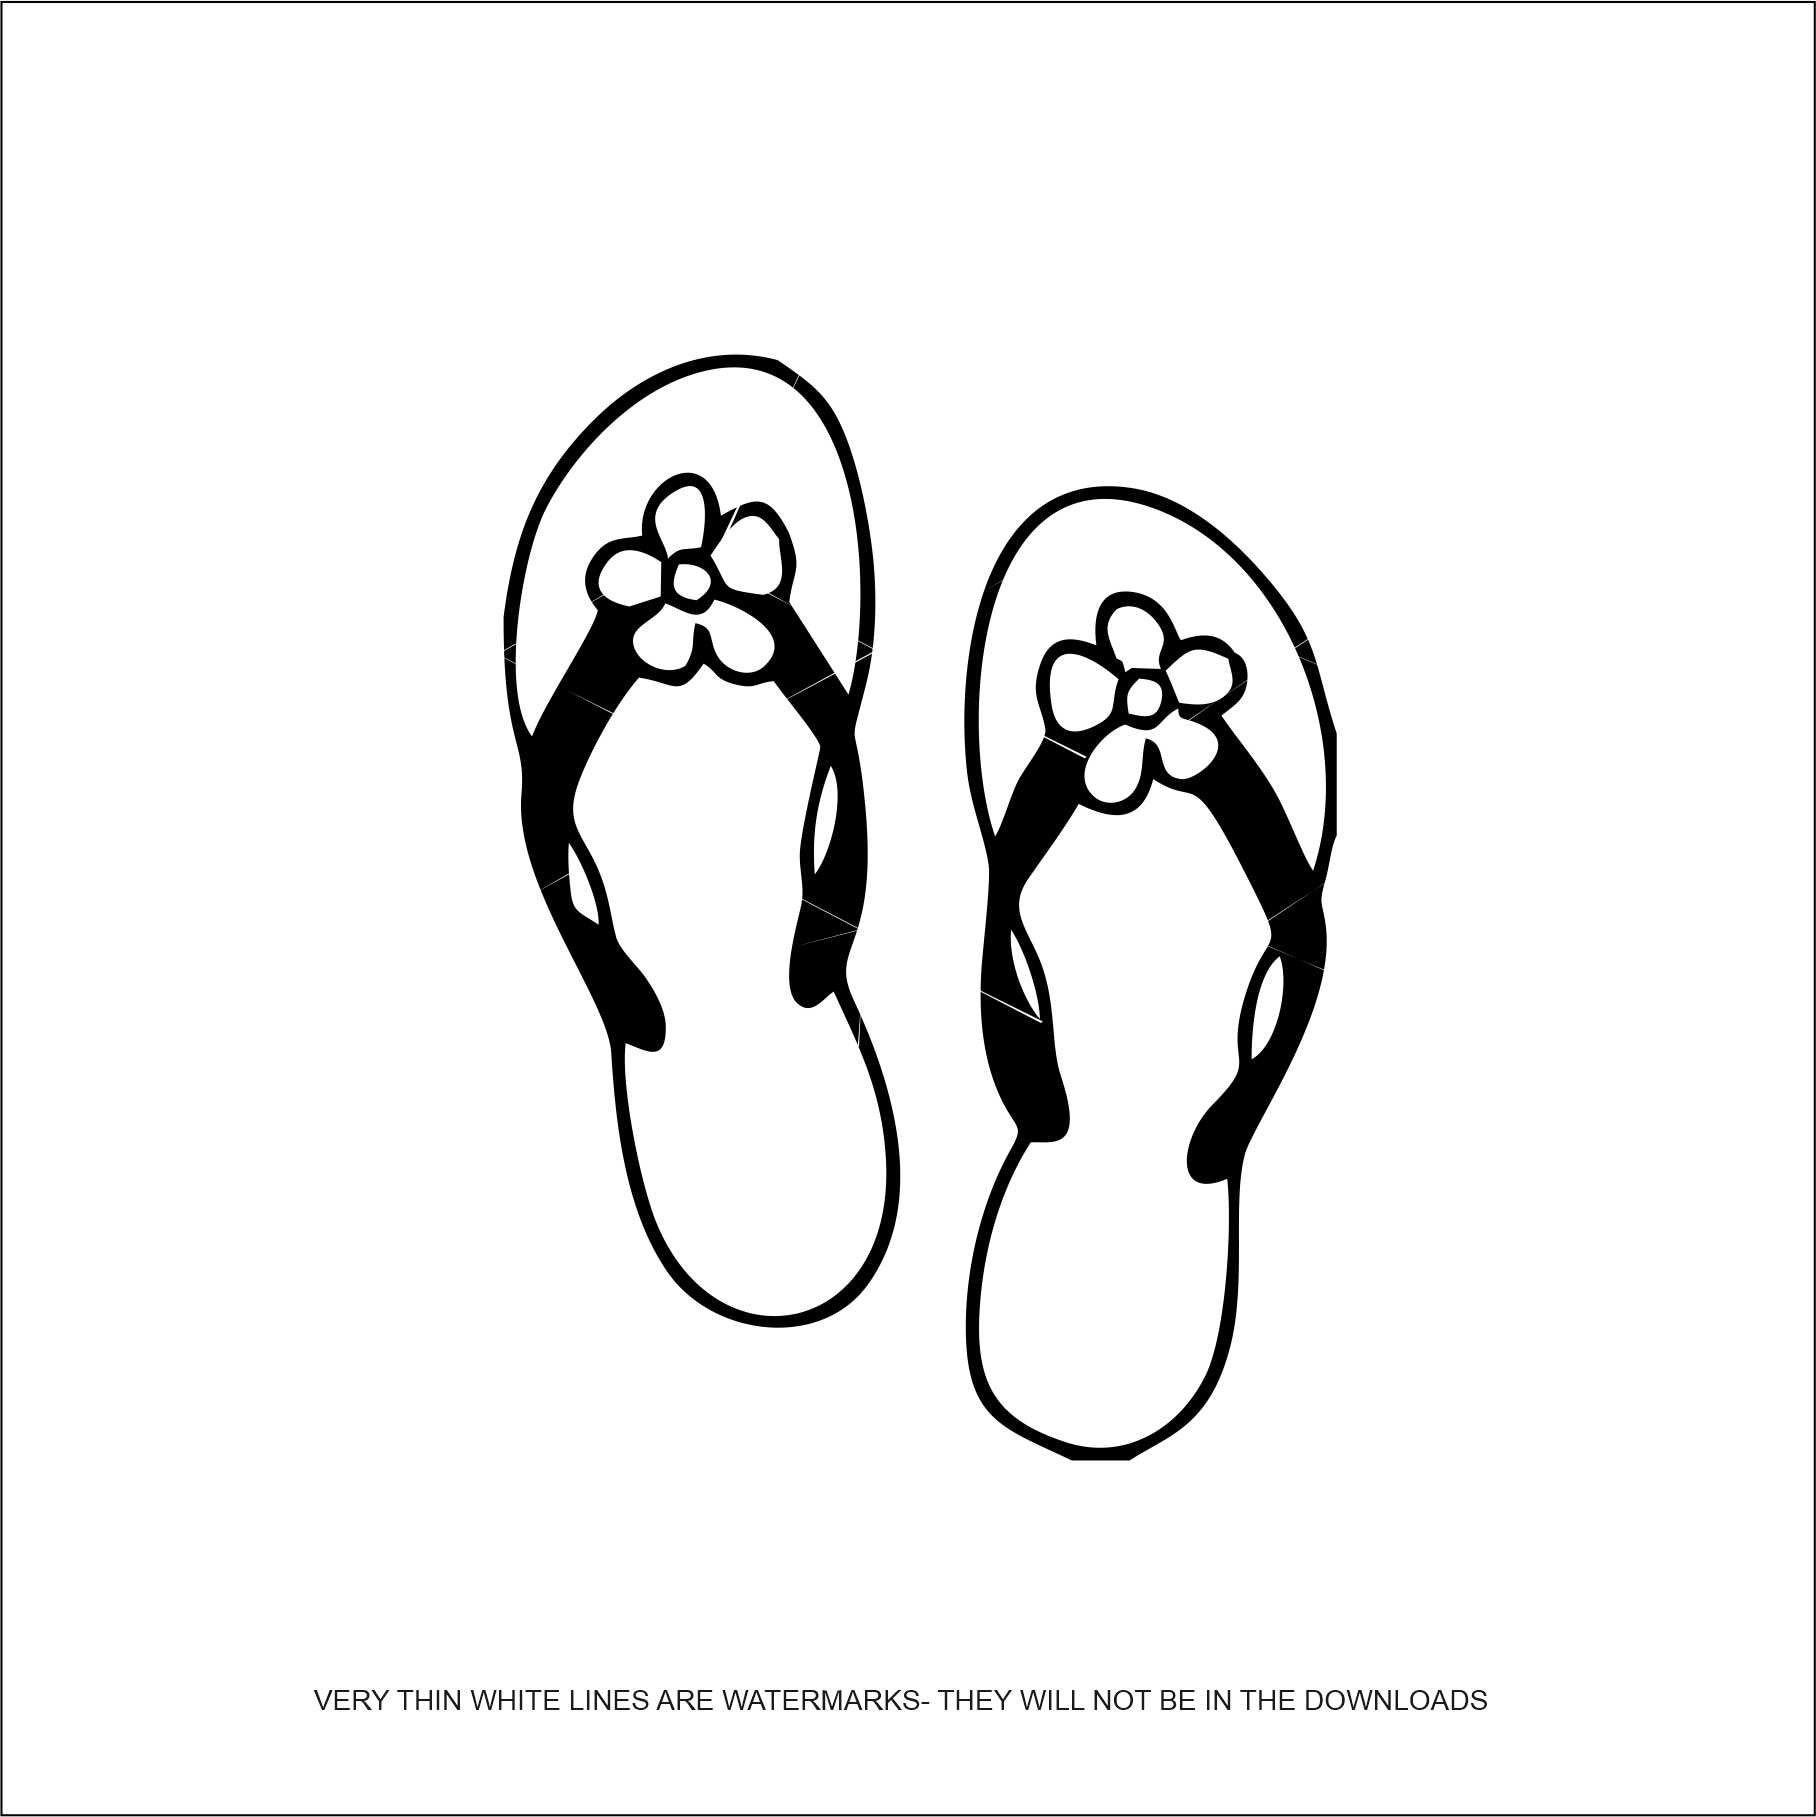 Flip Flop Clipart Black And White